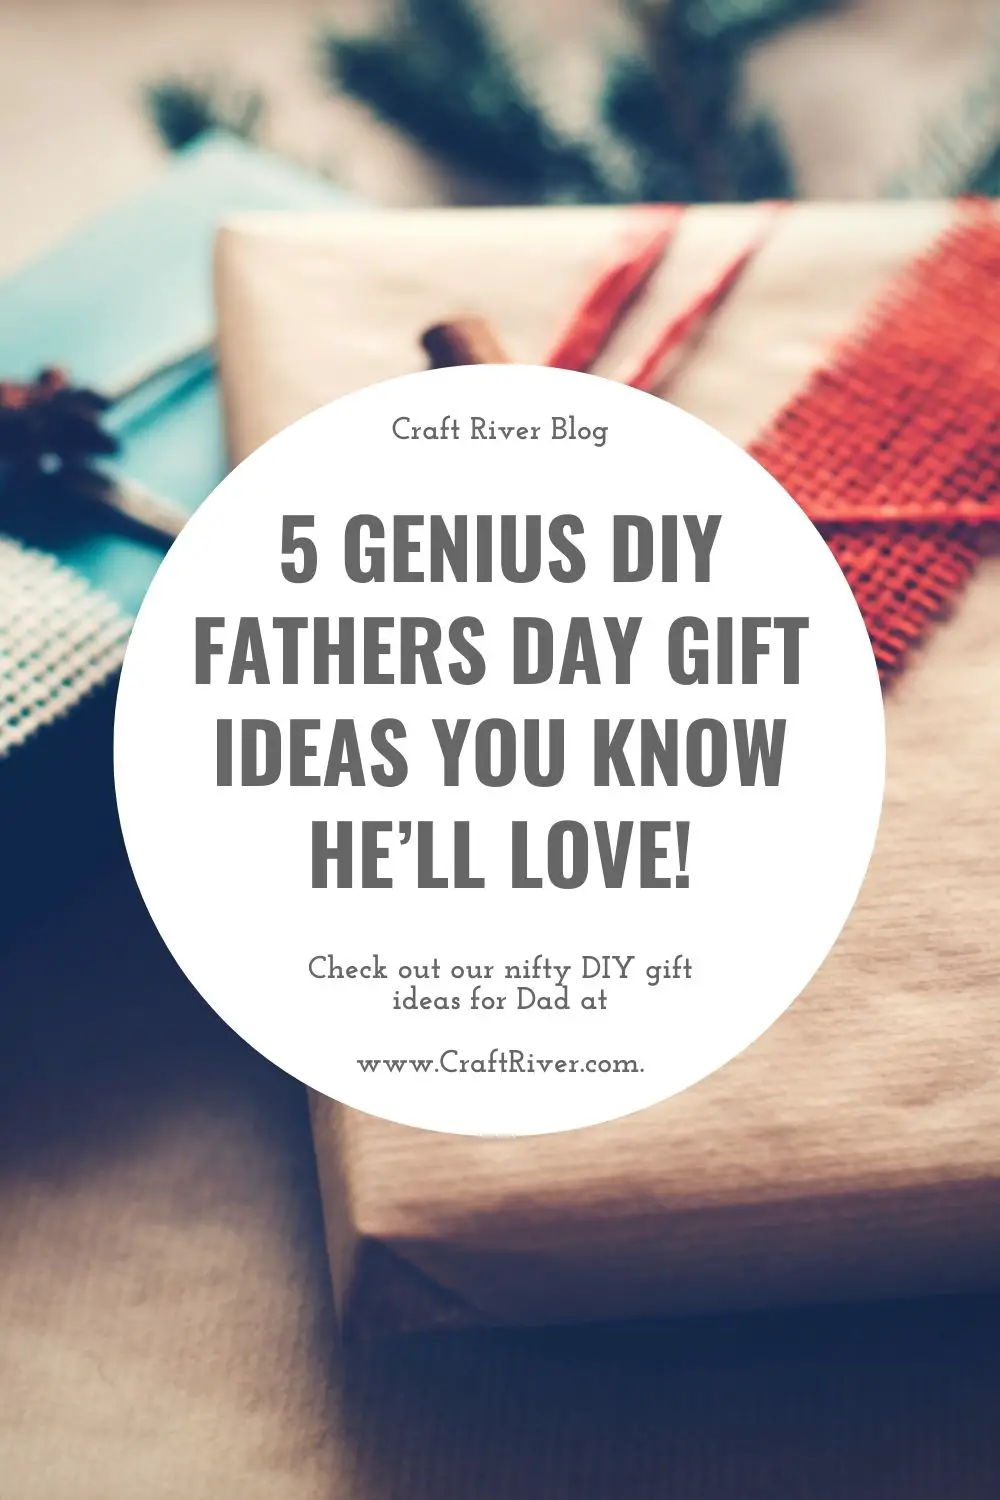 5 Genius DIY Fathers Day Gift Ideas You Know He’ll Love!